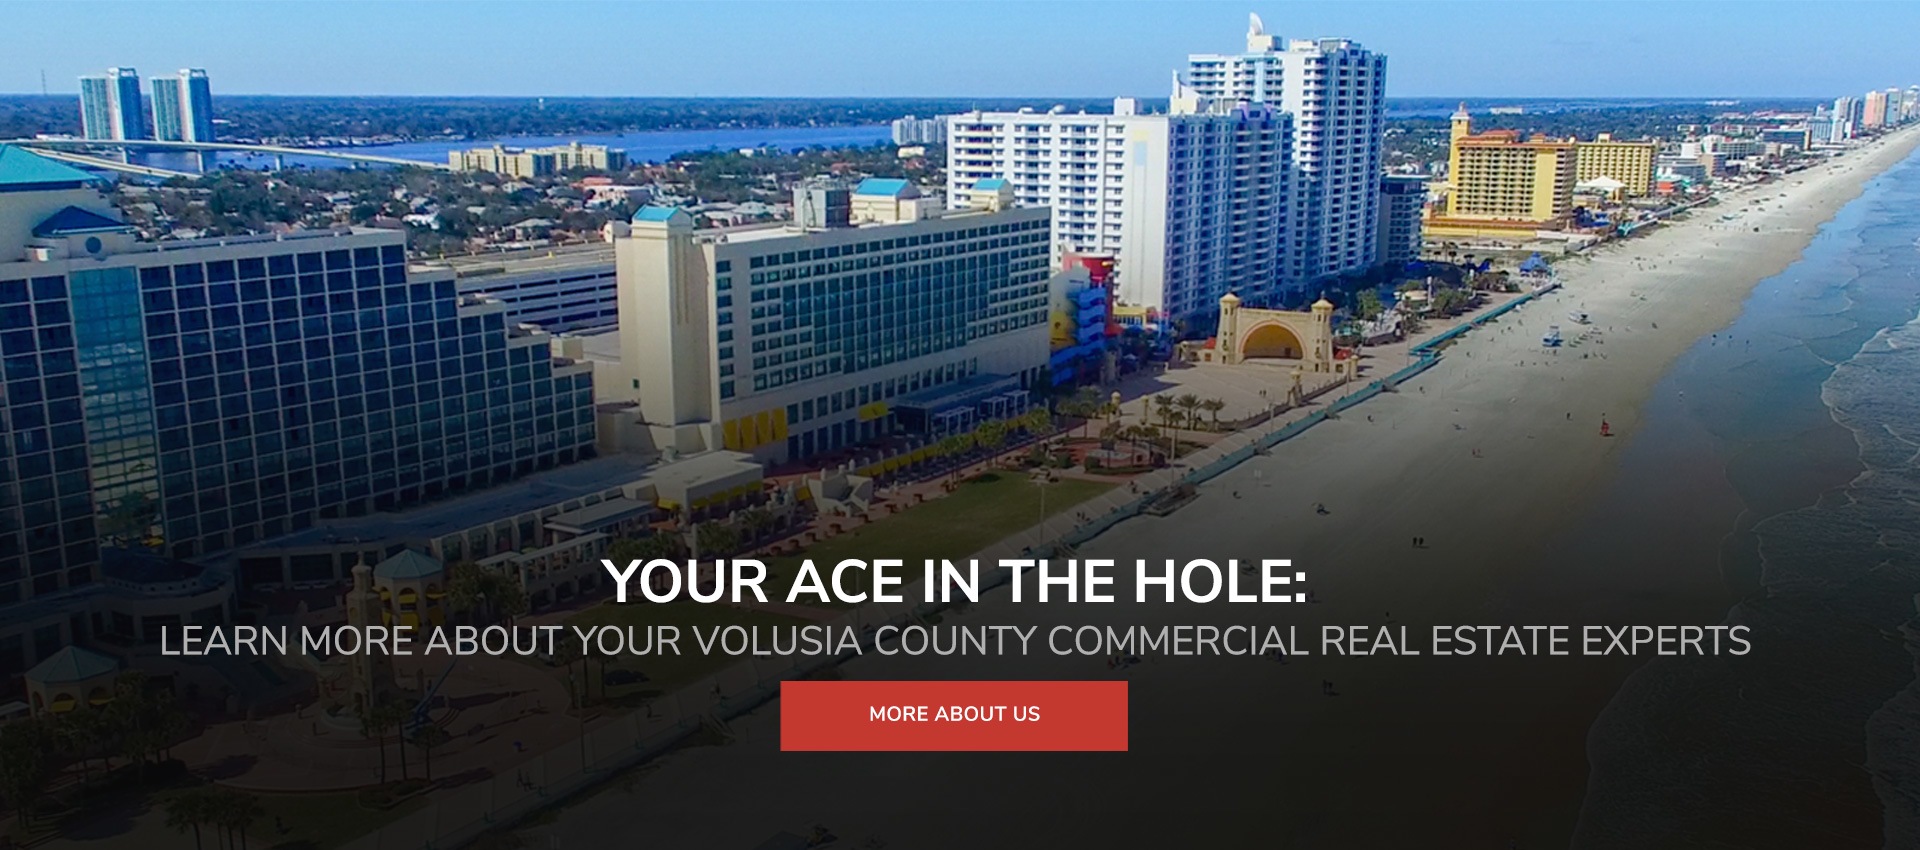 Your ace in the hole for Volusia County commercial real estate.